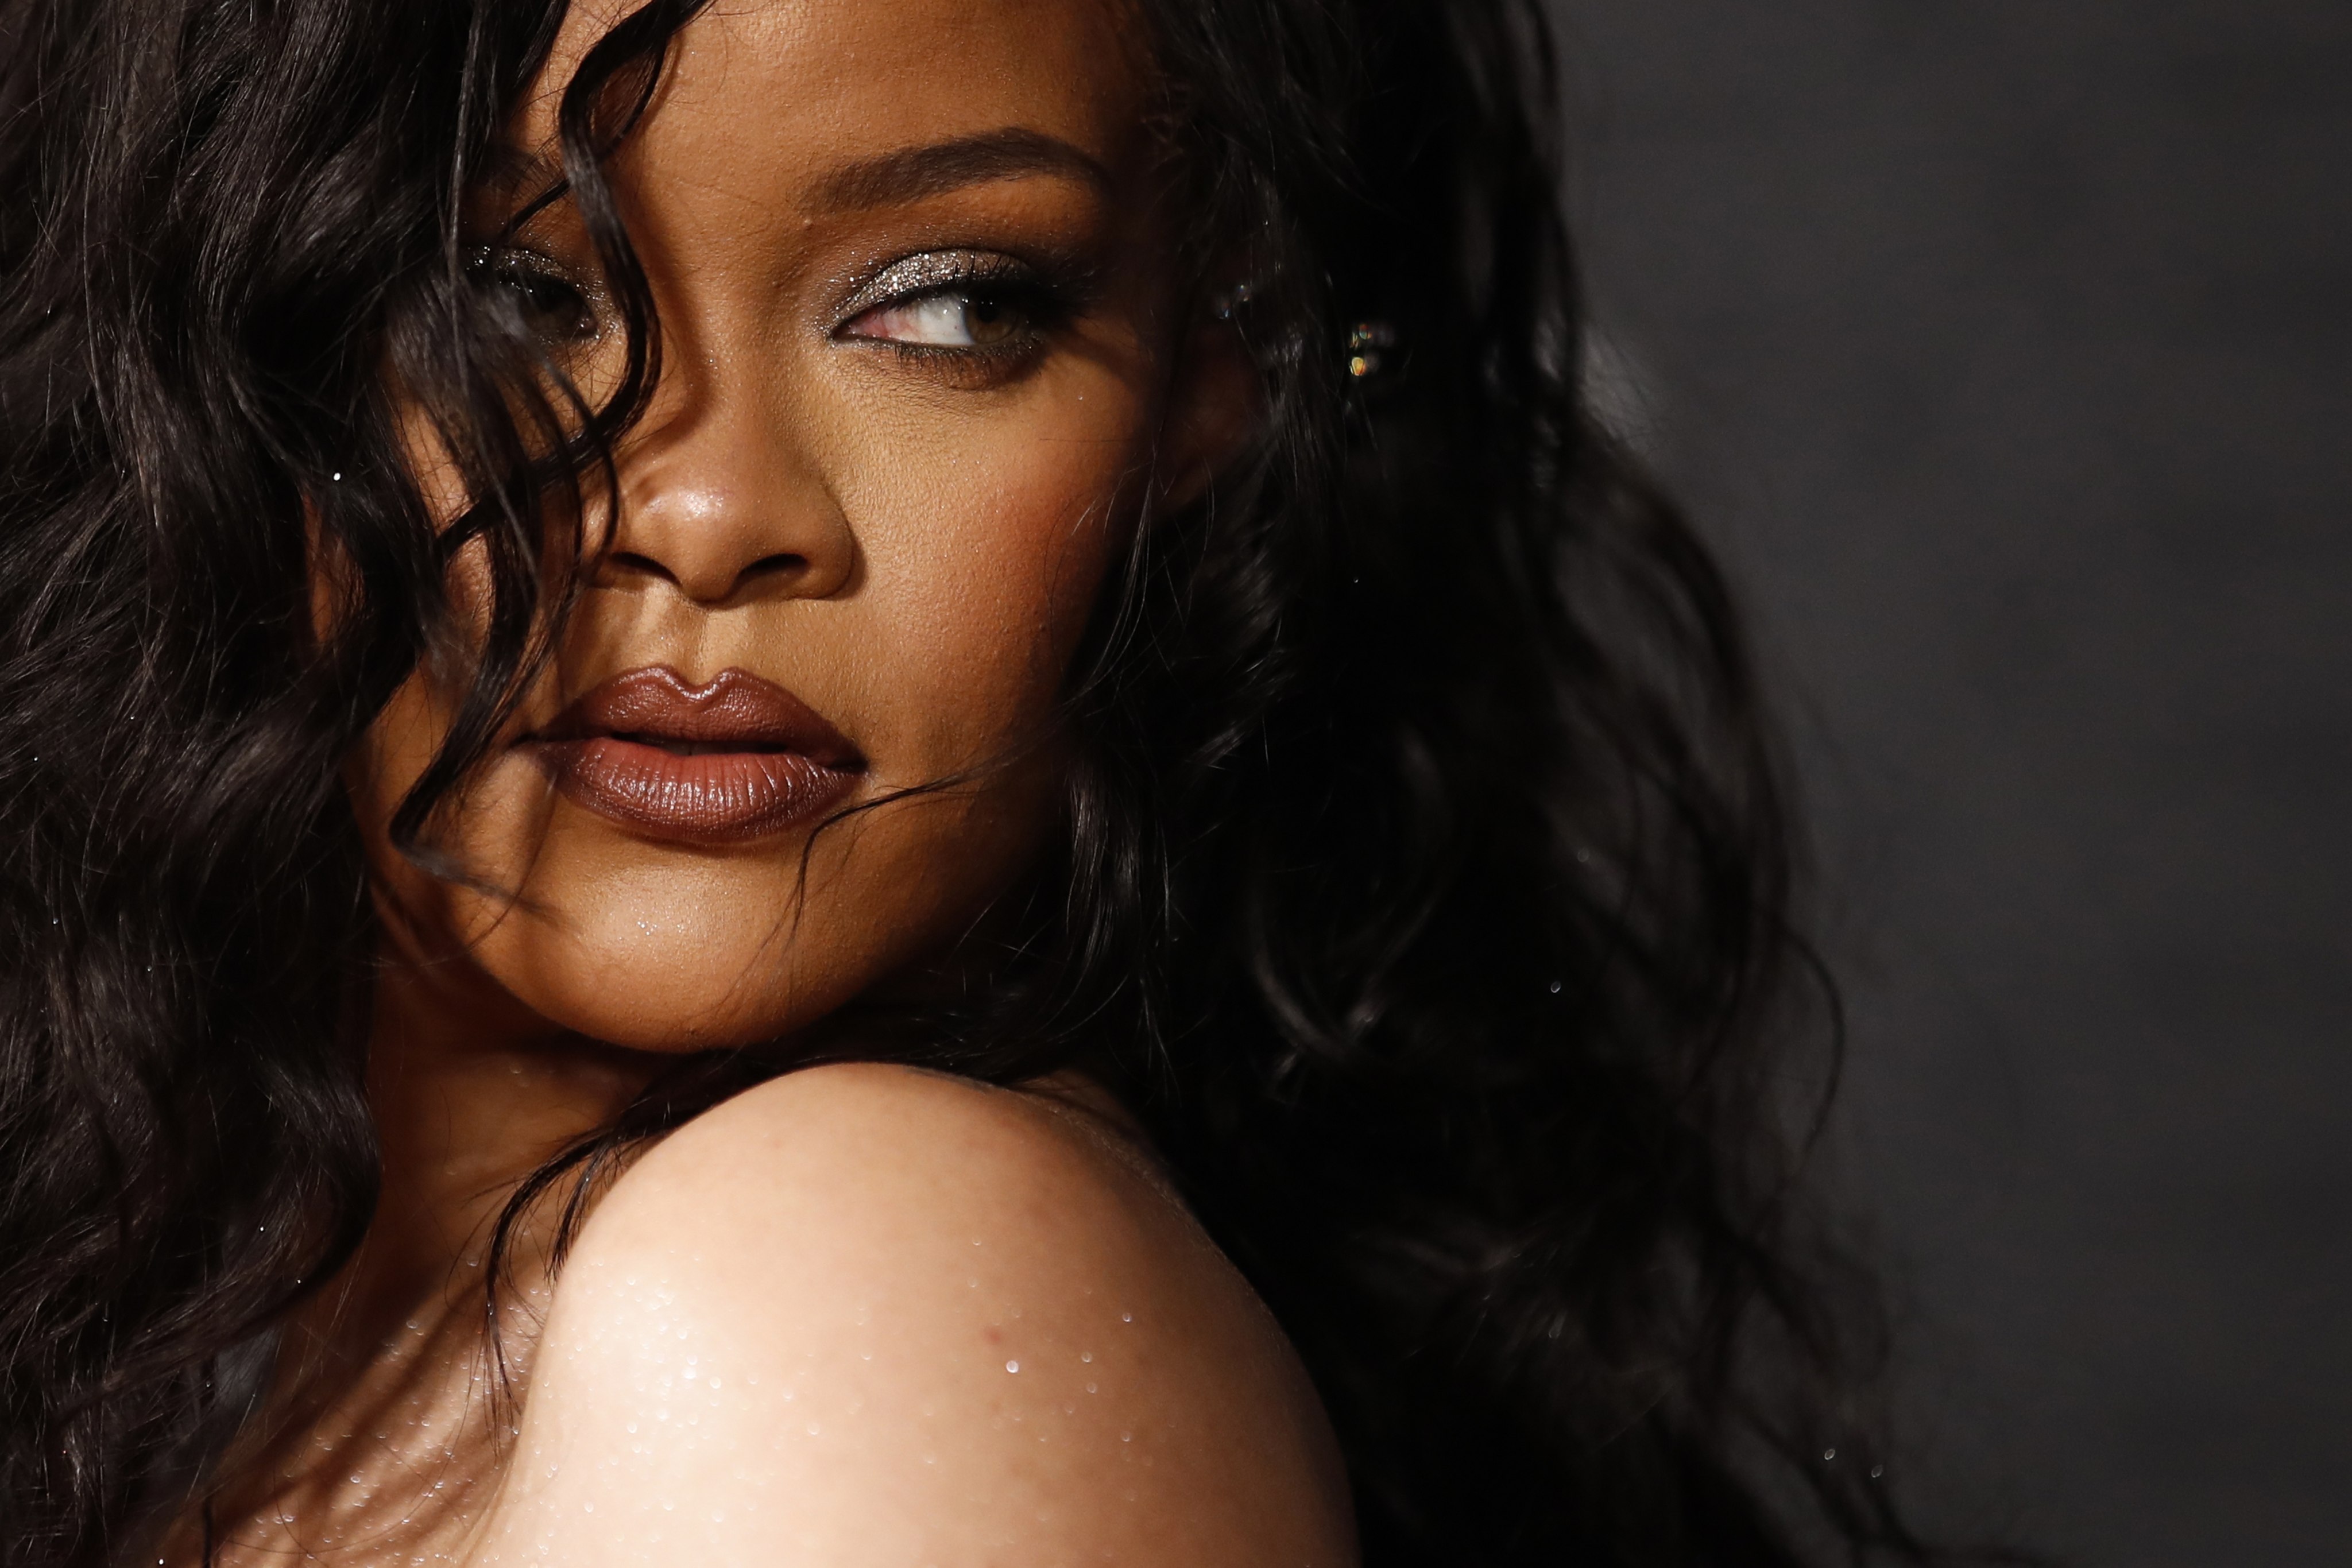 She’s back! Rihanna has a new single, a Super Bowl halftime show and a Savage x Fenty show in her sights. Photo: EPA-EFE